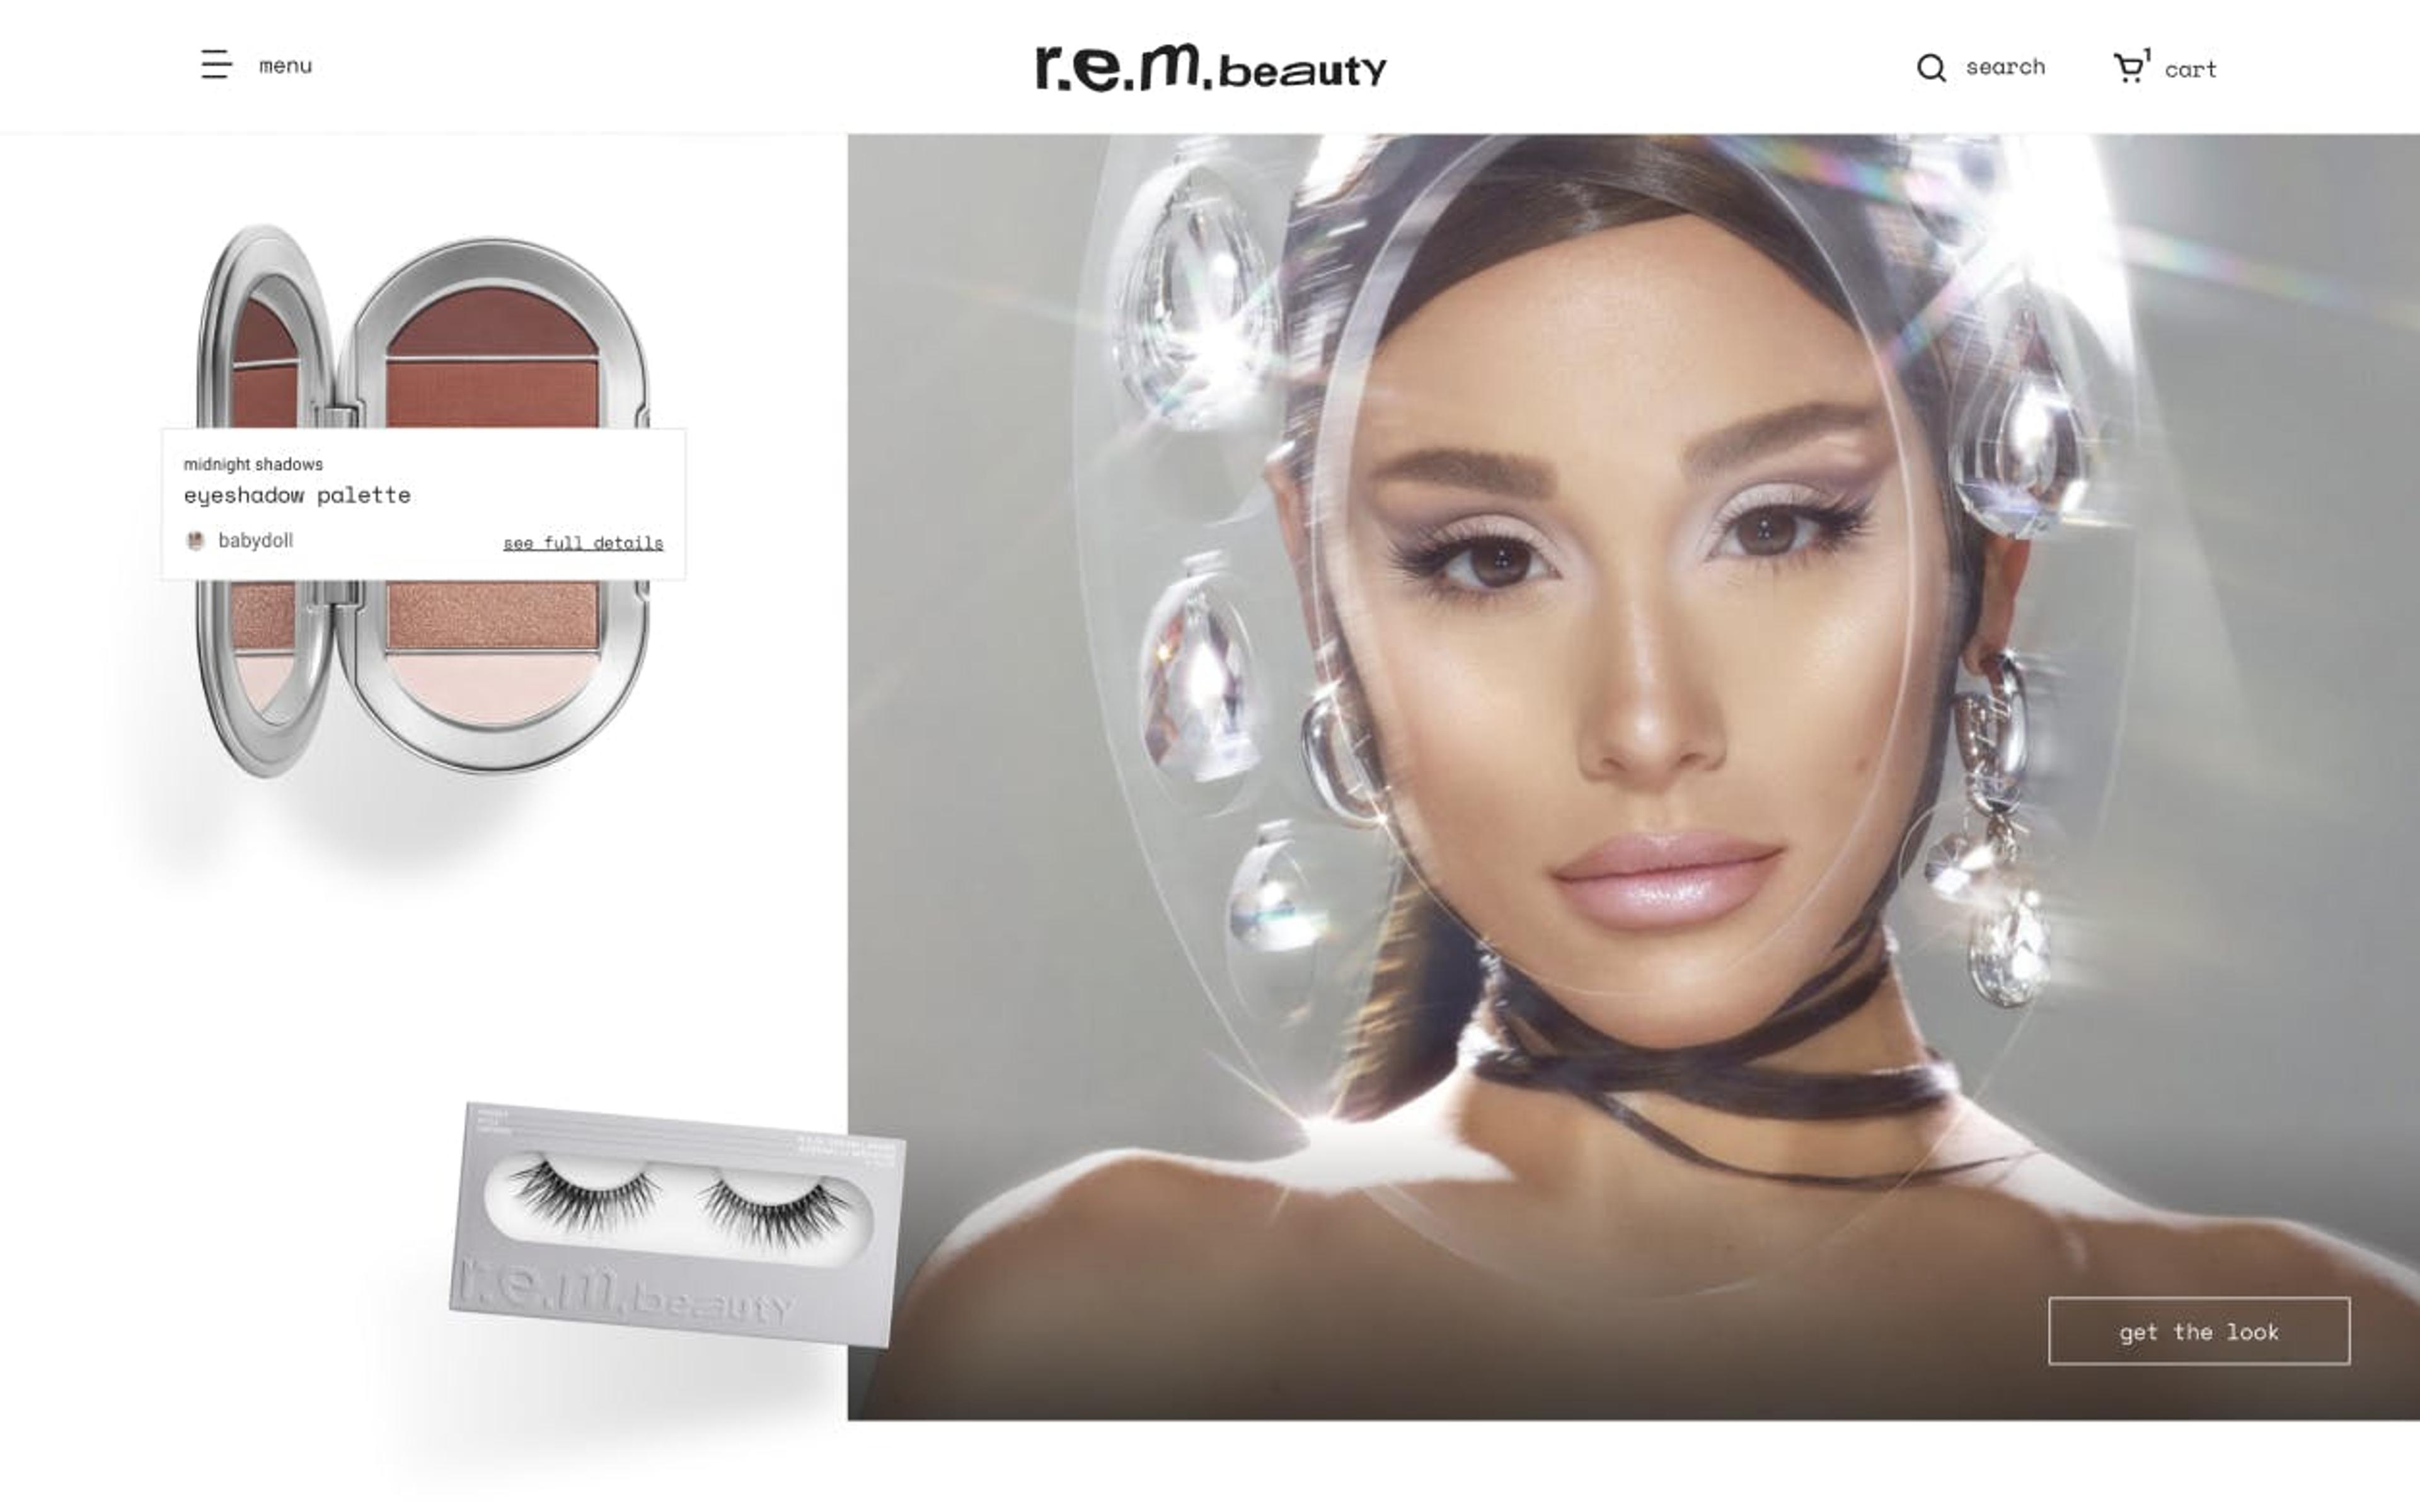 Developing a dreamy, superspeed experience for Ariana Grande’s R.E.M beauty line